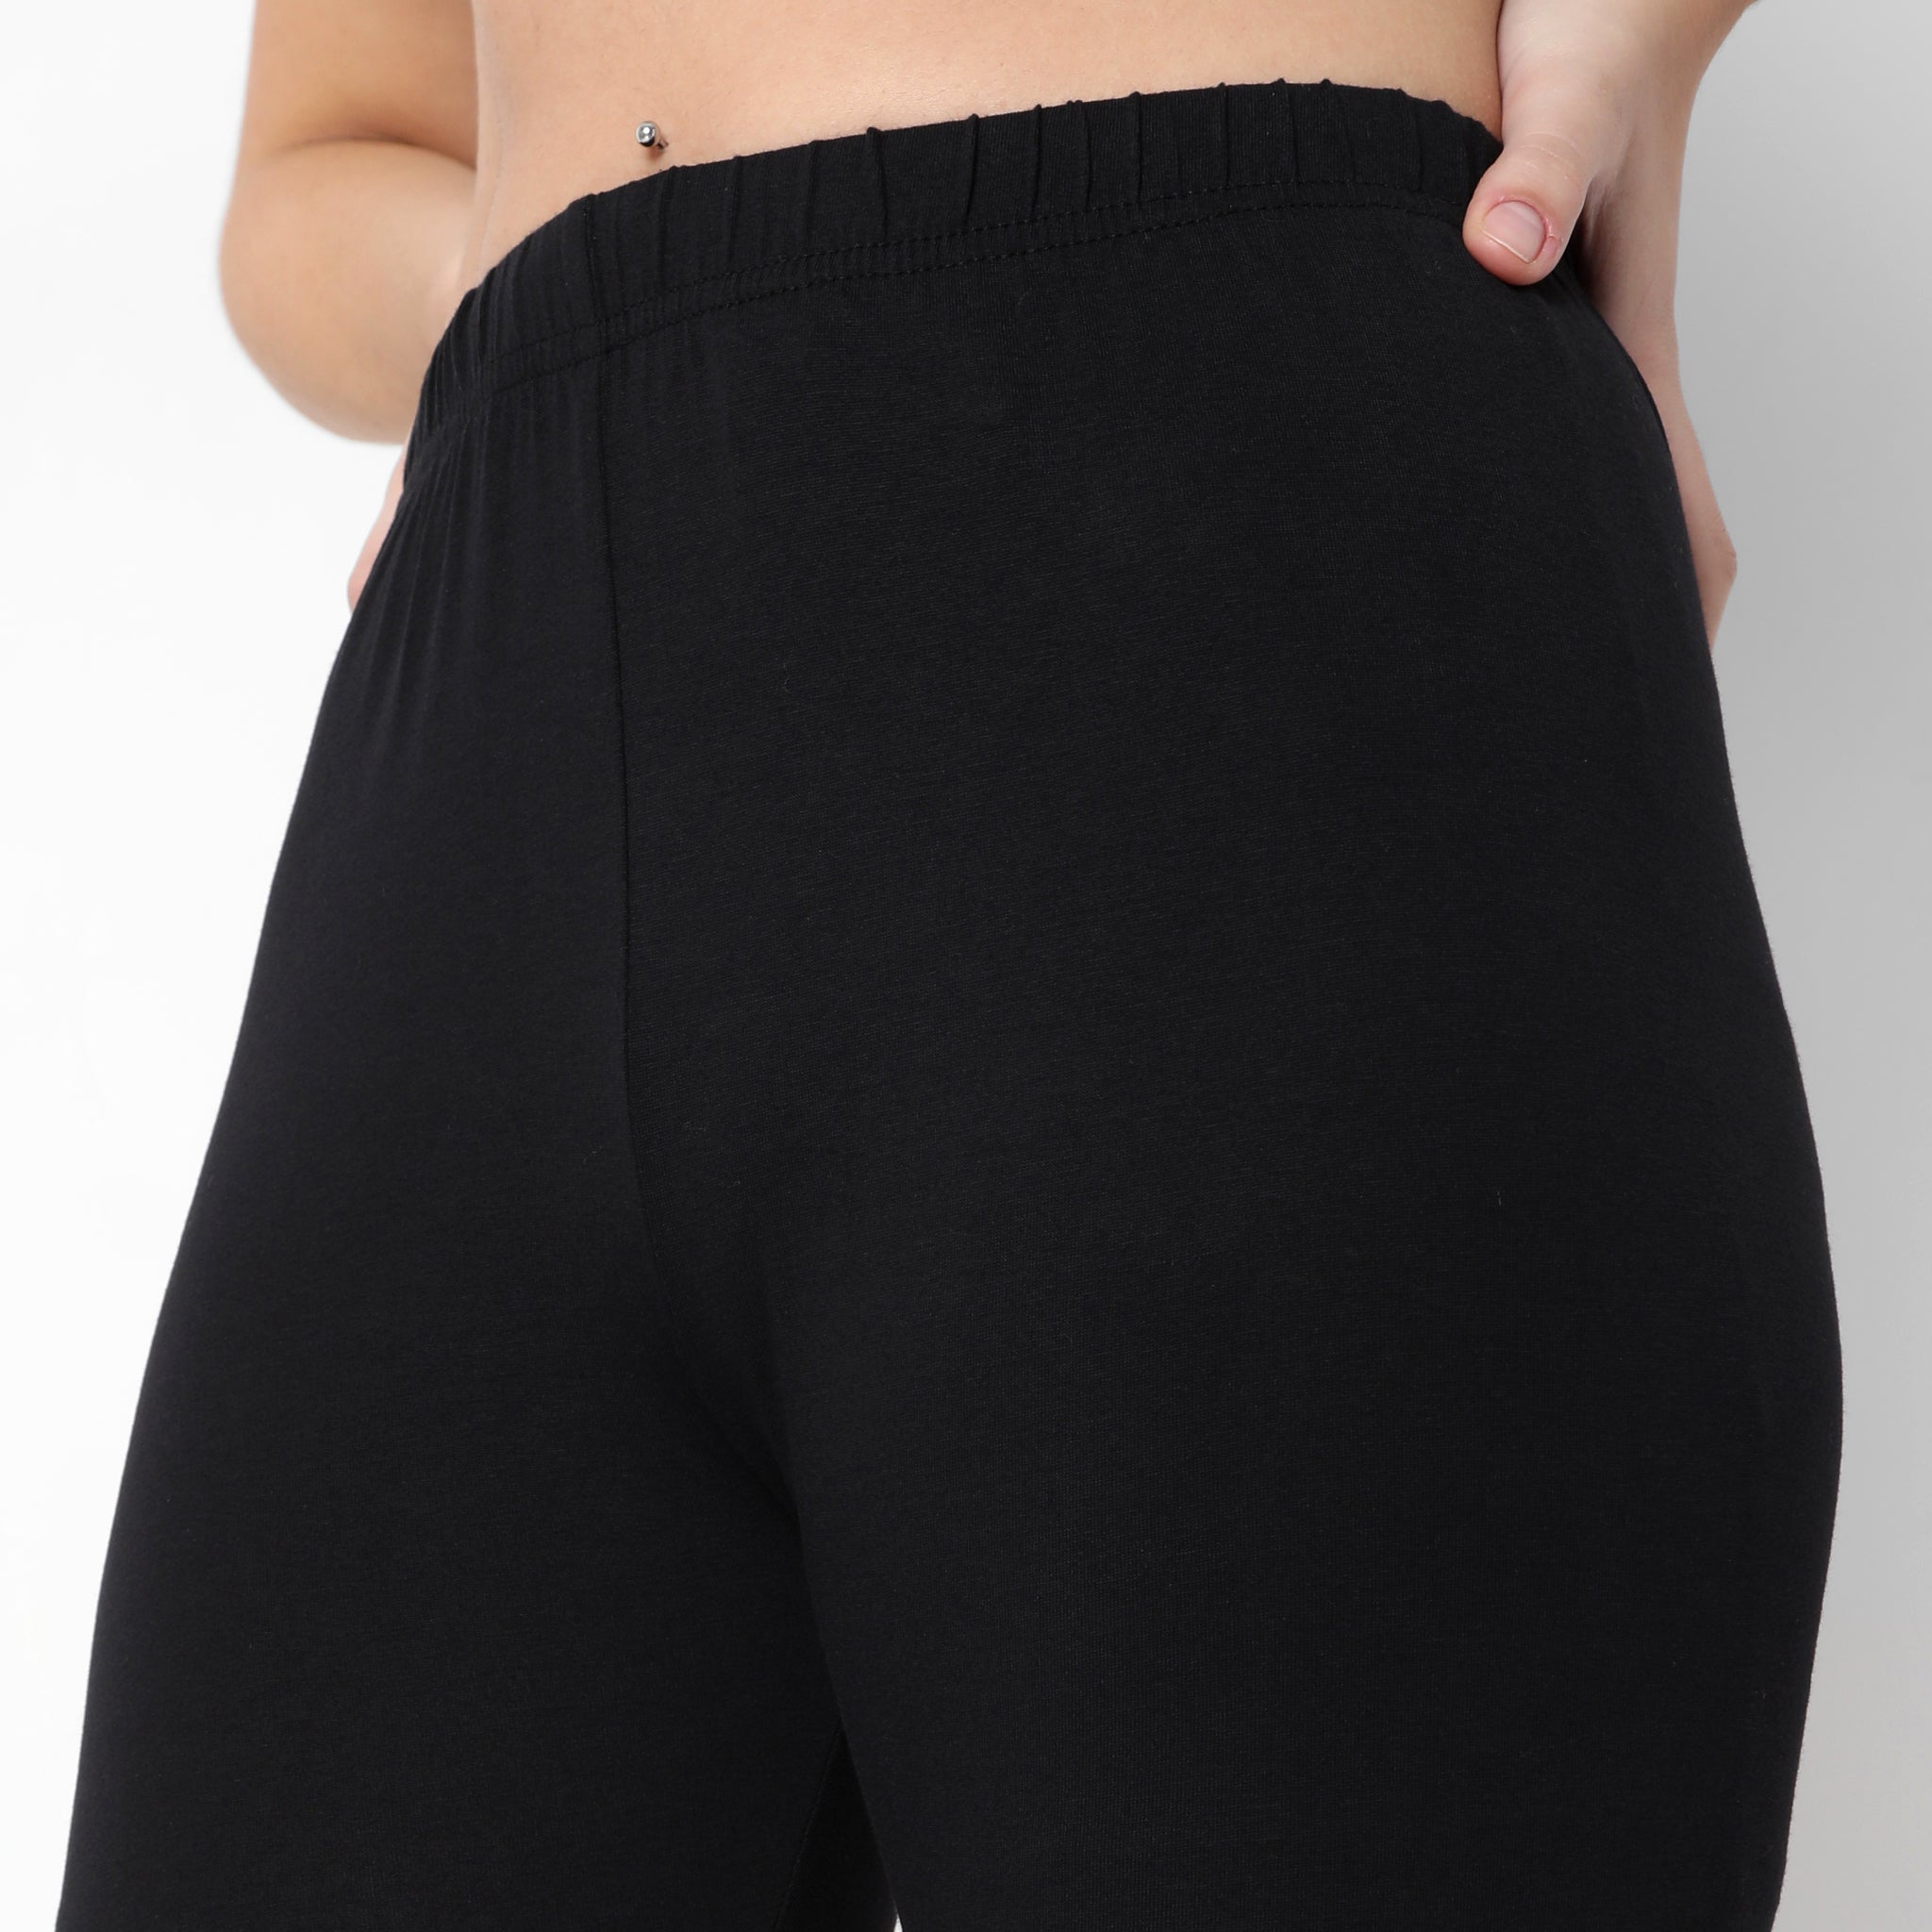 Straight Fit Solid Mid Rise Leggings